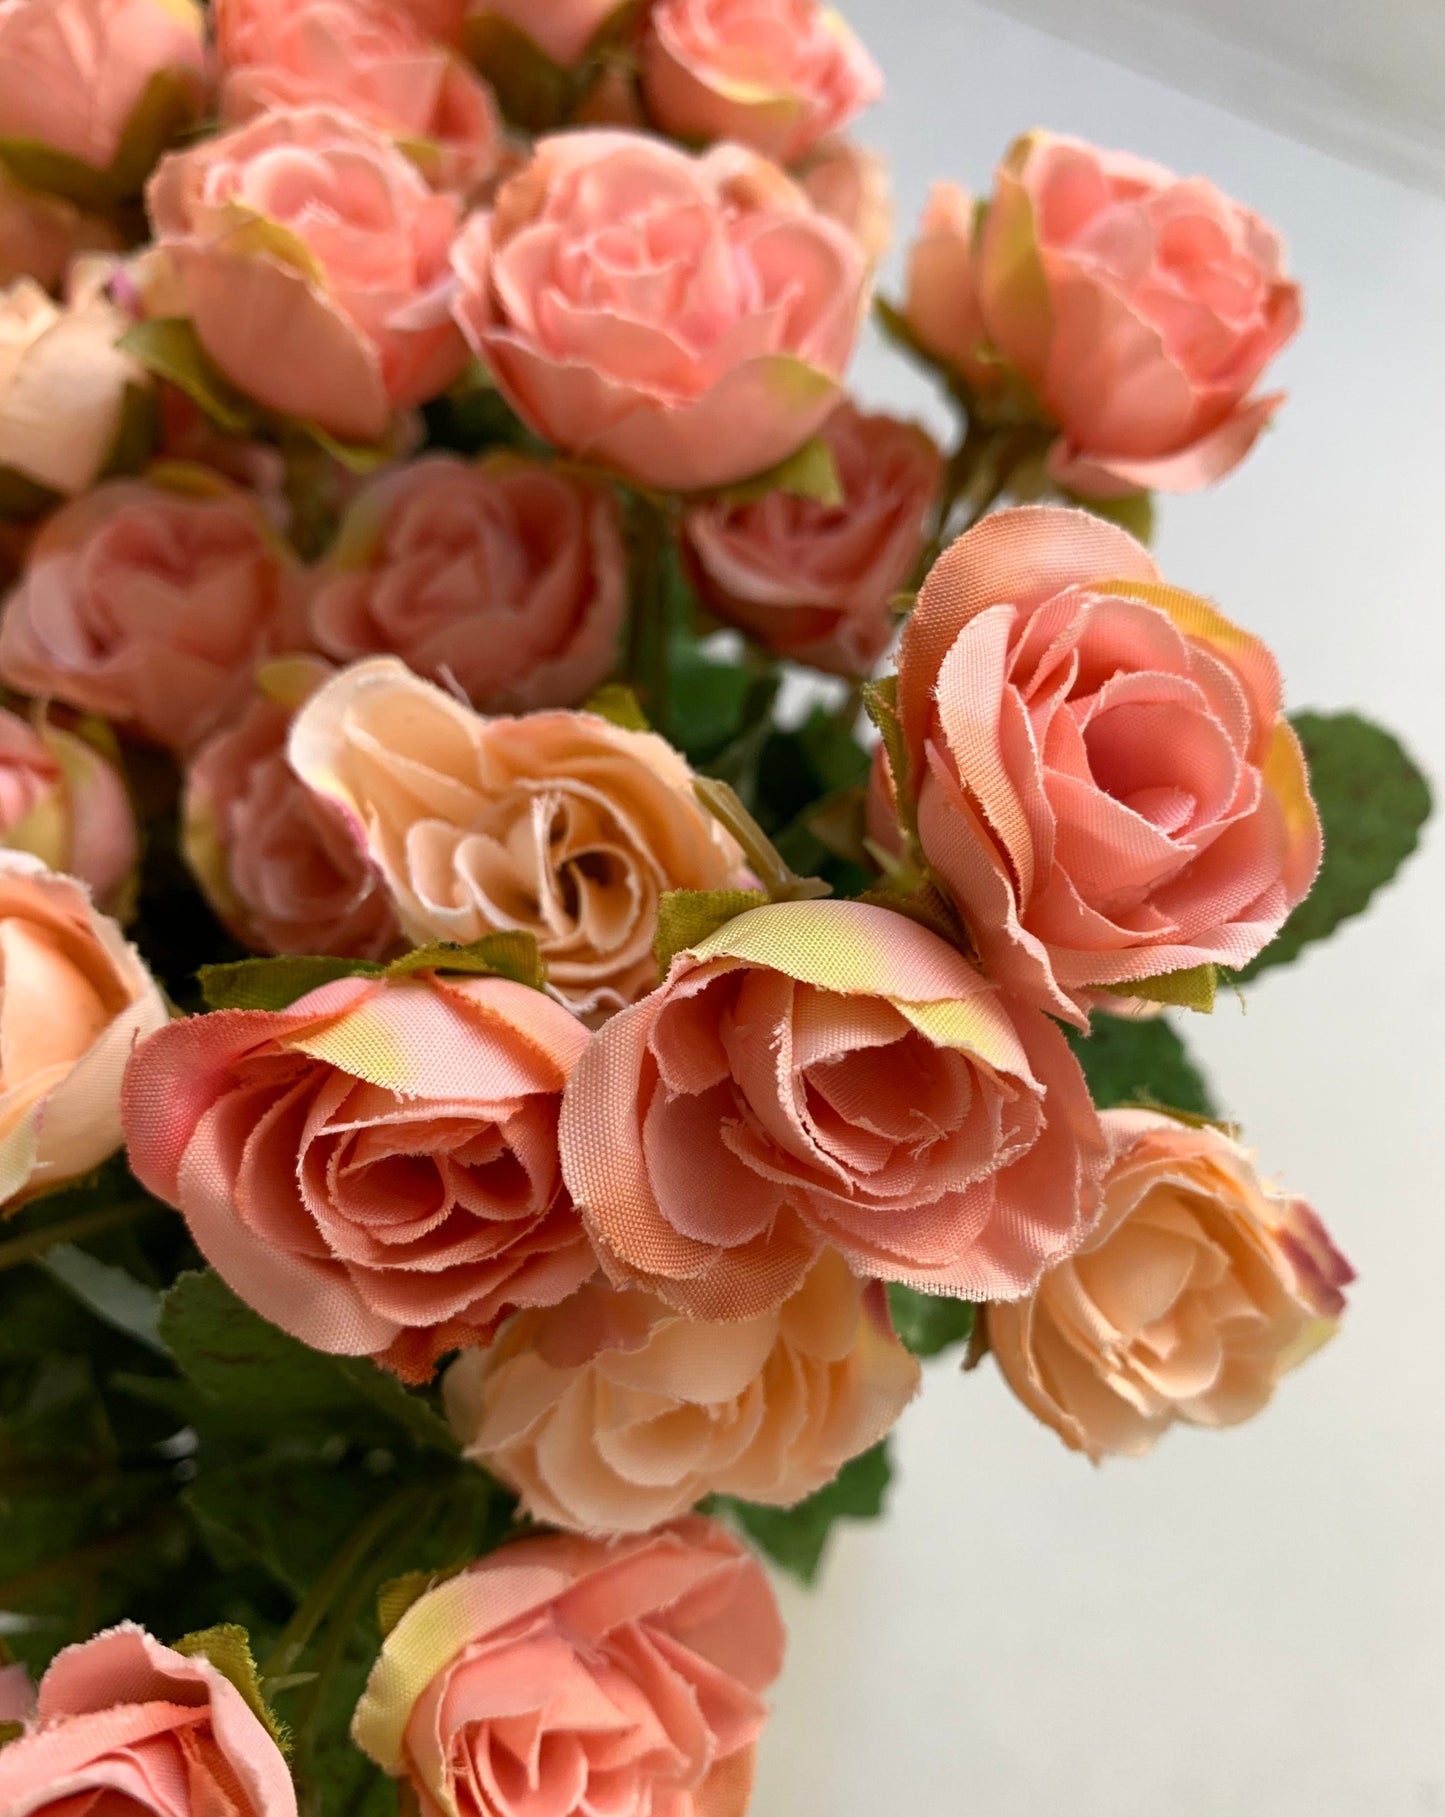 Bouquet of tiny rose artificial flowers - peach